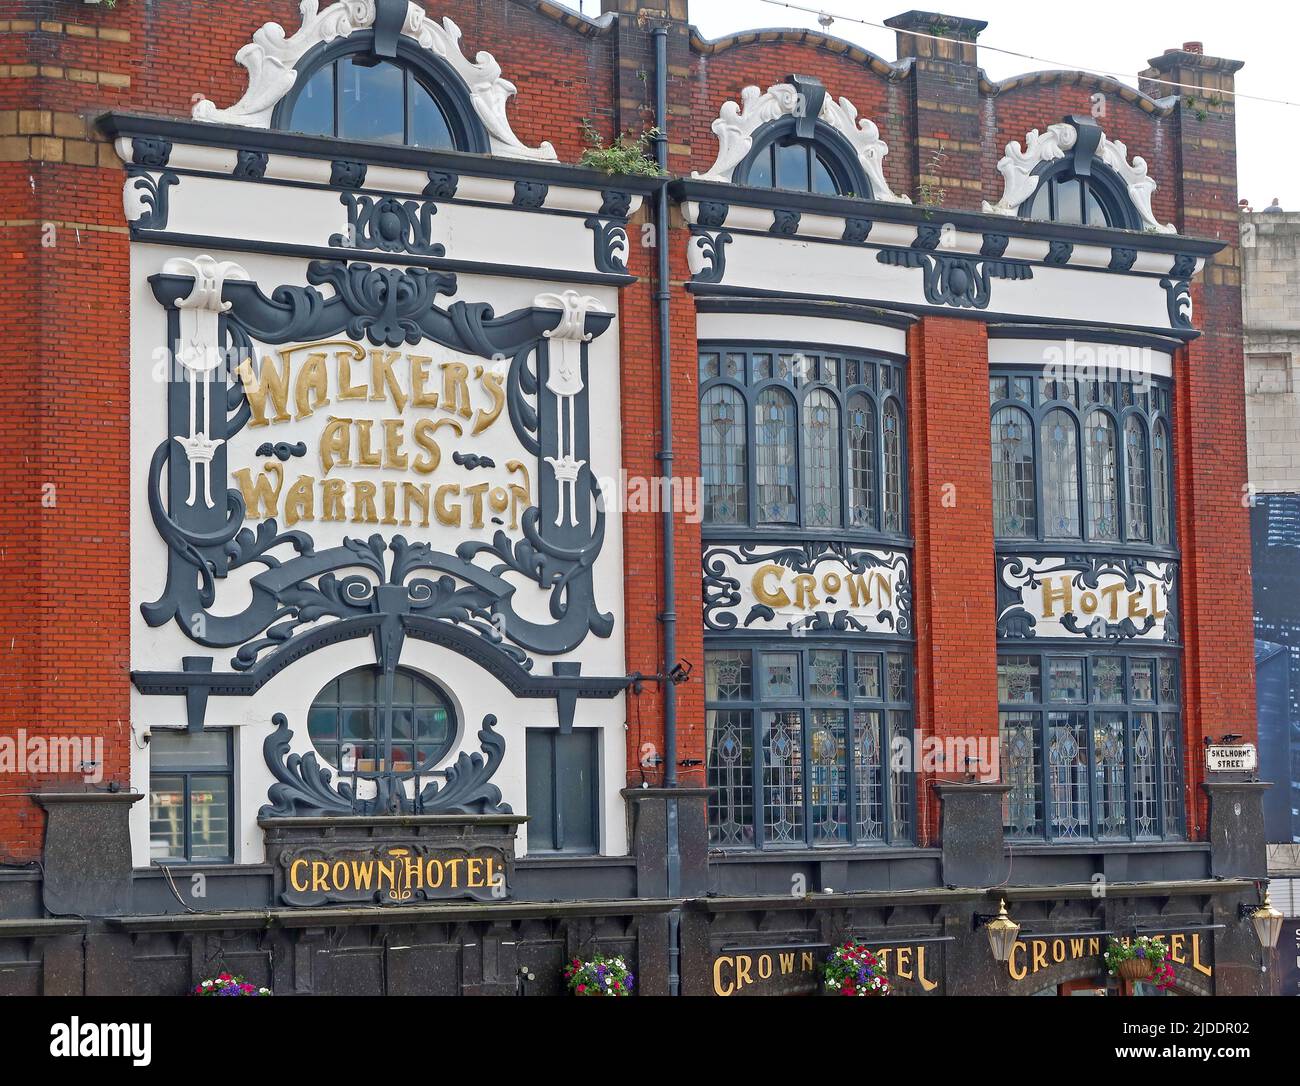 The Crown Hotel, Walkers Ales Warrington, situé au 43 Lime Street, Liverpool, Merseyside, Angleterre, Royaume-Uni, L1 1JQ Banque D'Images